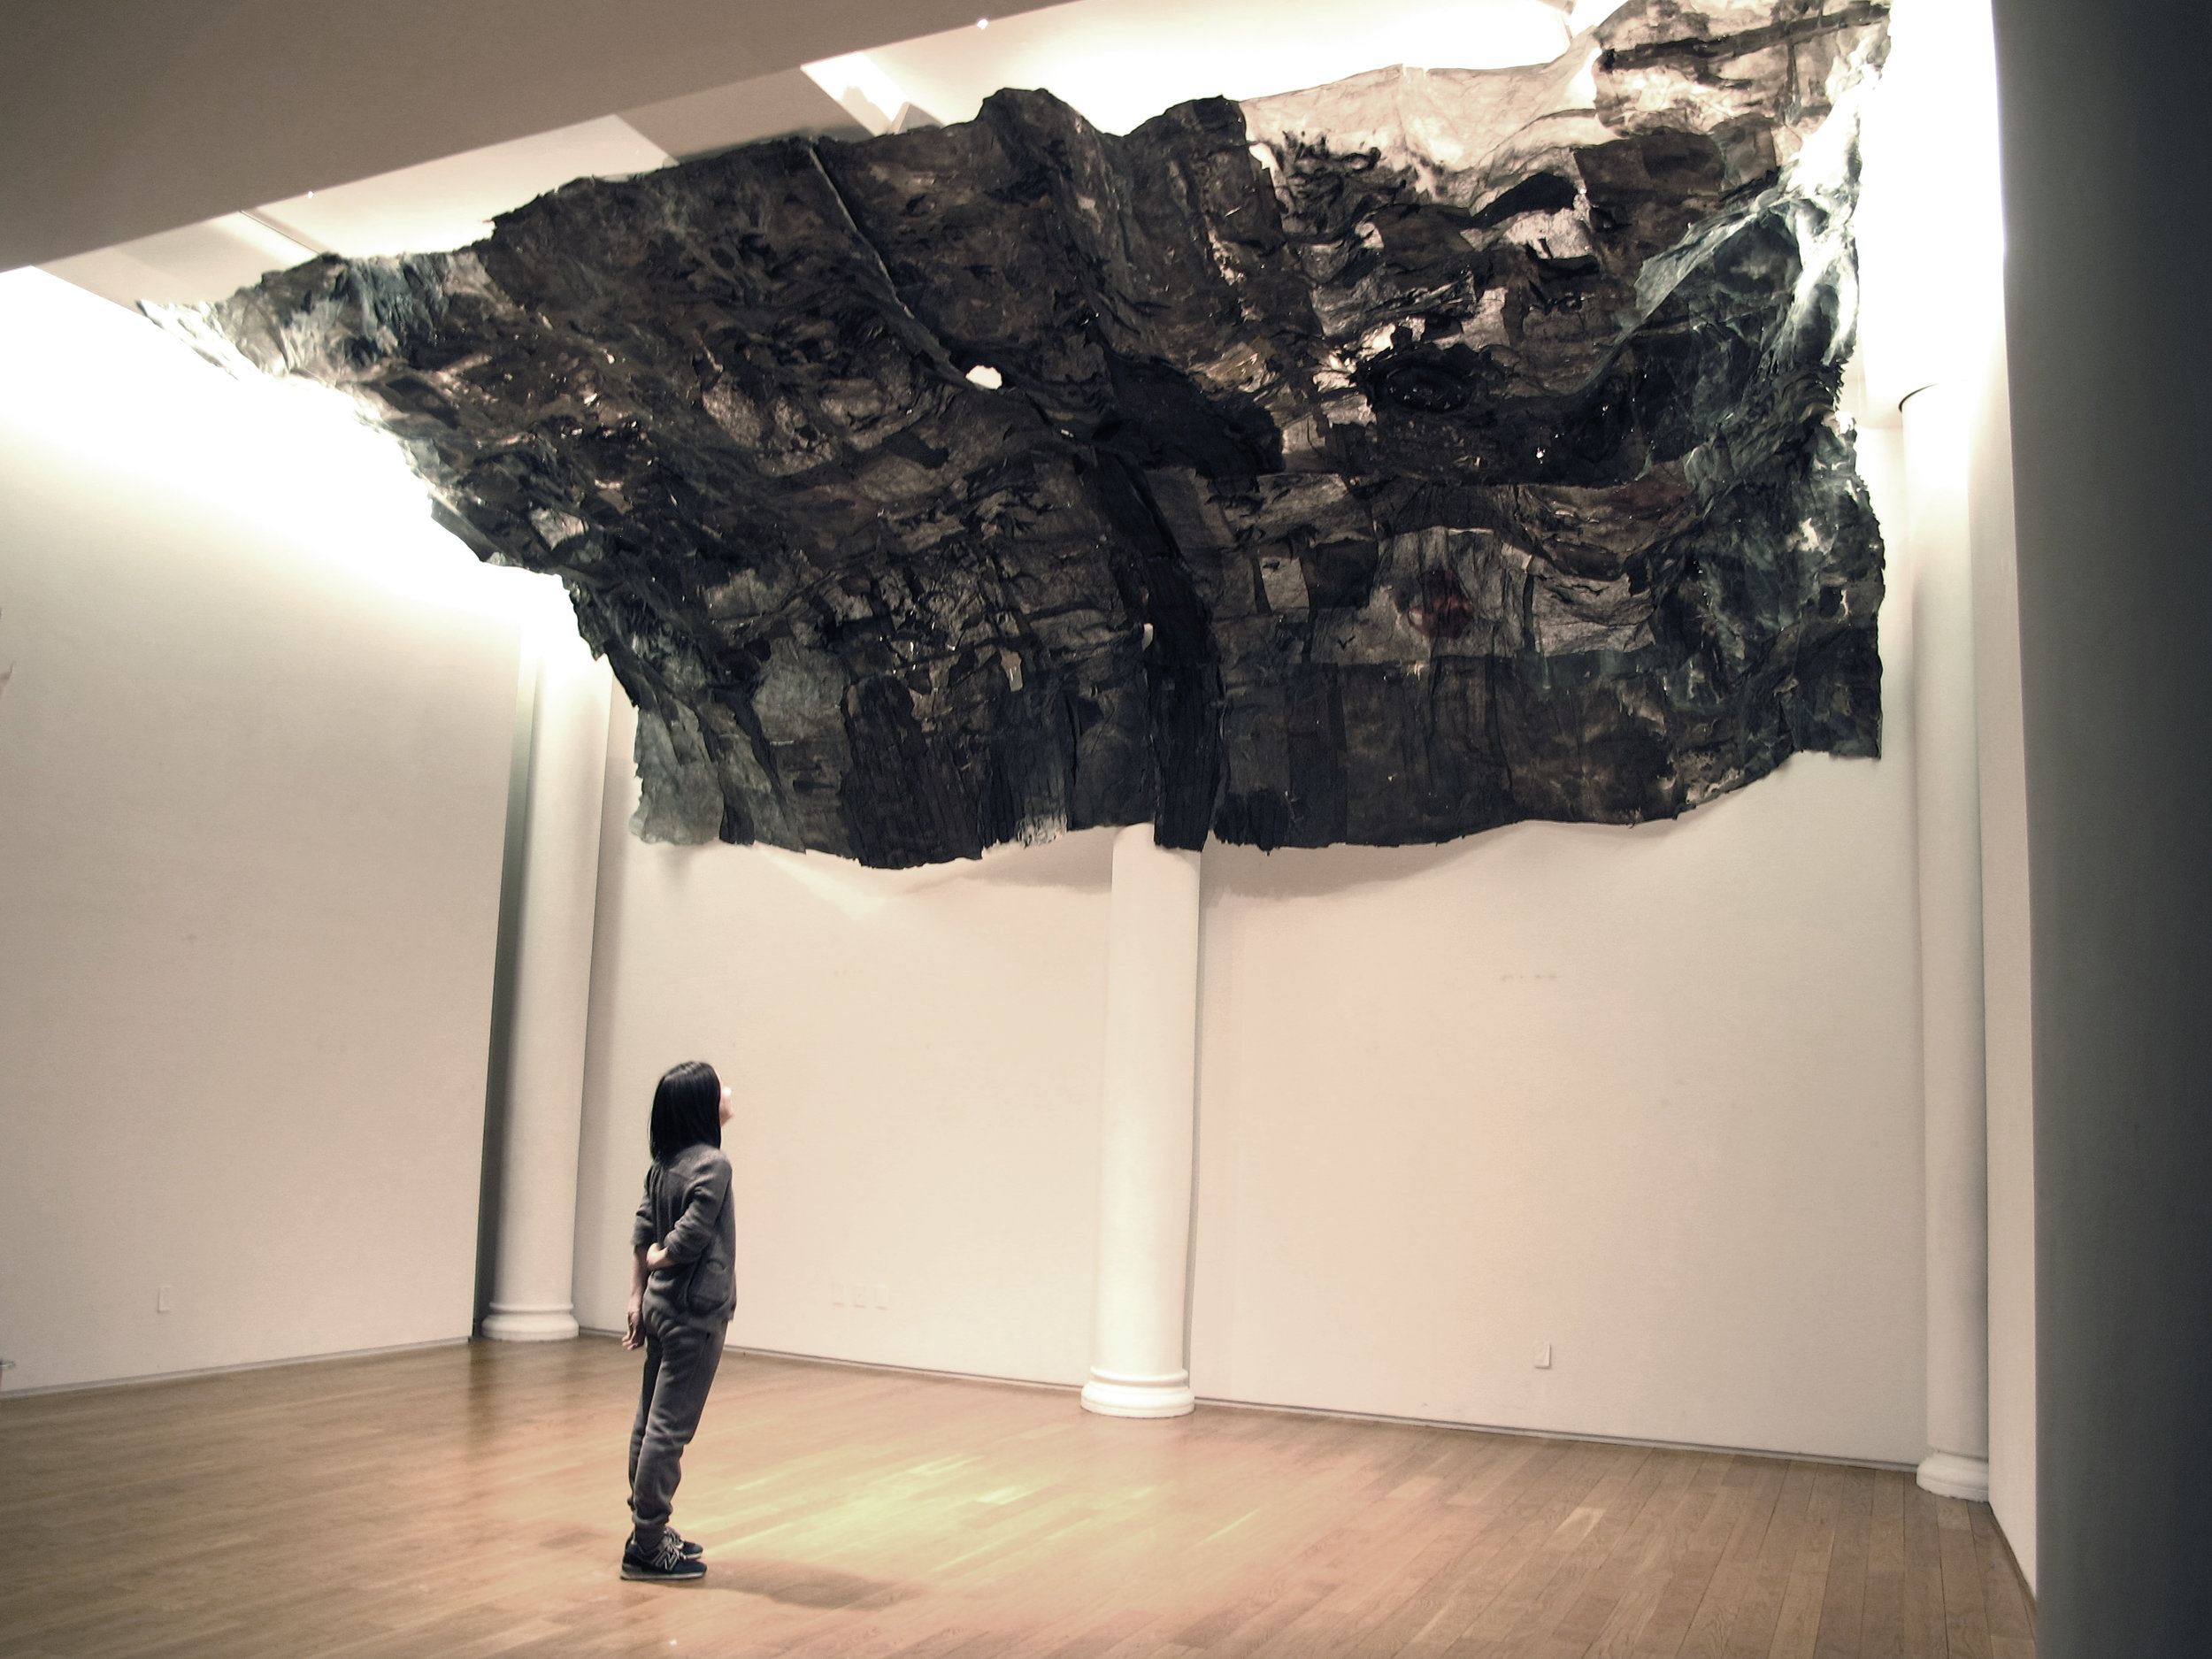   Inhale 吸 , 301 x 200 x 74.8 in. (765 x 508 x 190 cm), Ink, plastic bag, light and Xuan paper installation, 2014. ©2017 Lin Yan, courtesy Tenri Culture Institute and Fou Gallery. Photograph by Jiaxi Yang. 